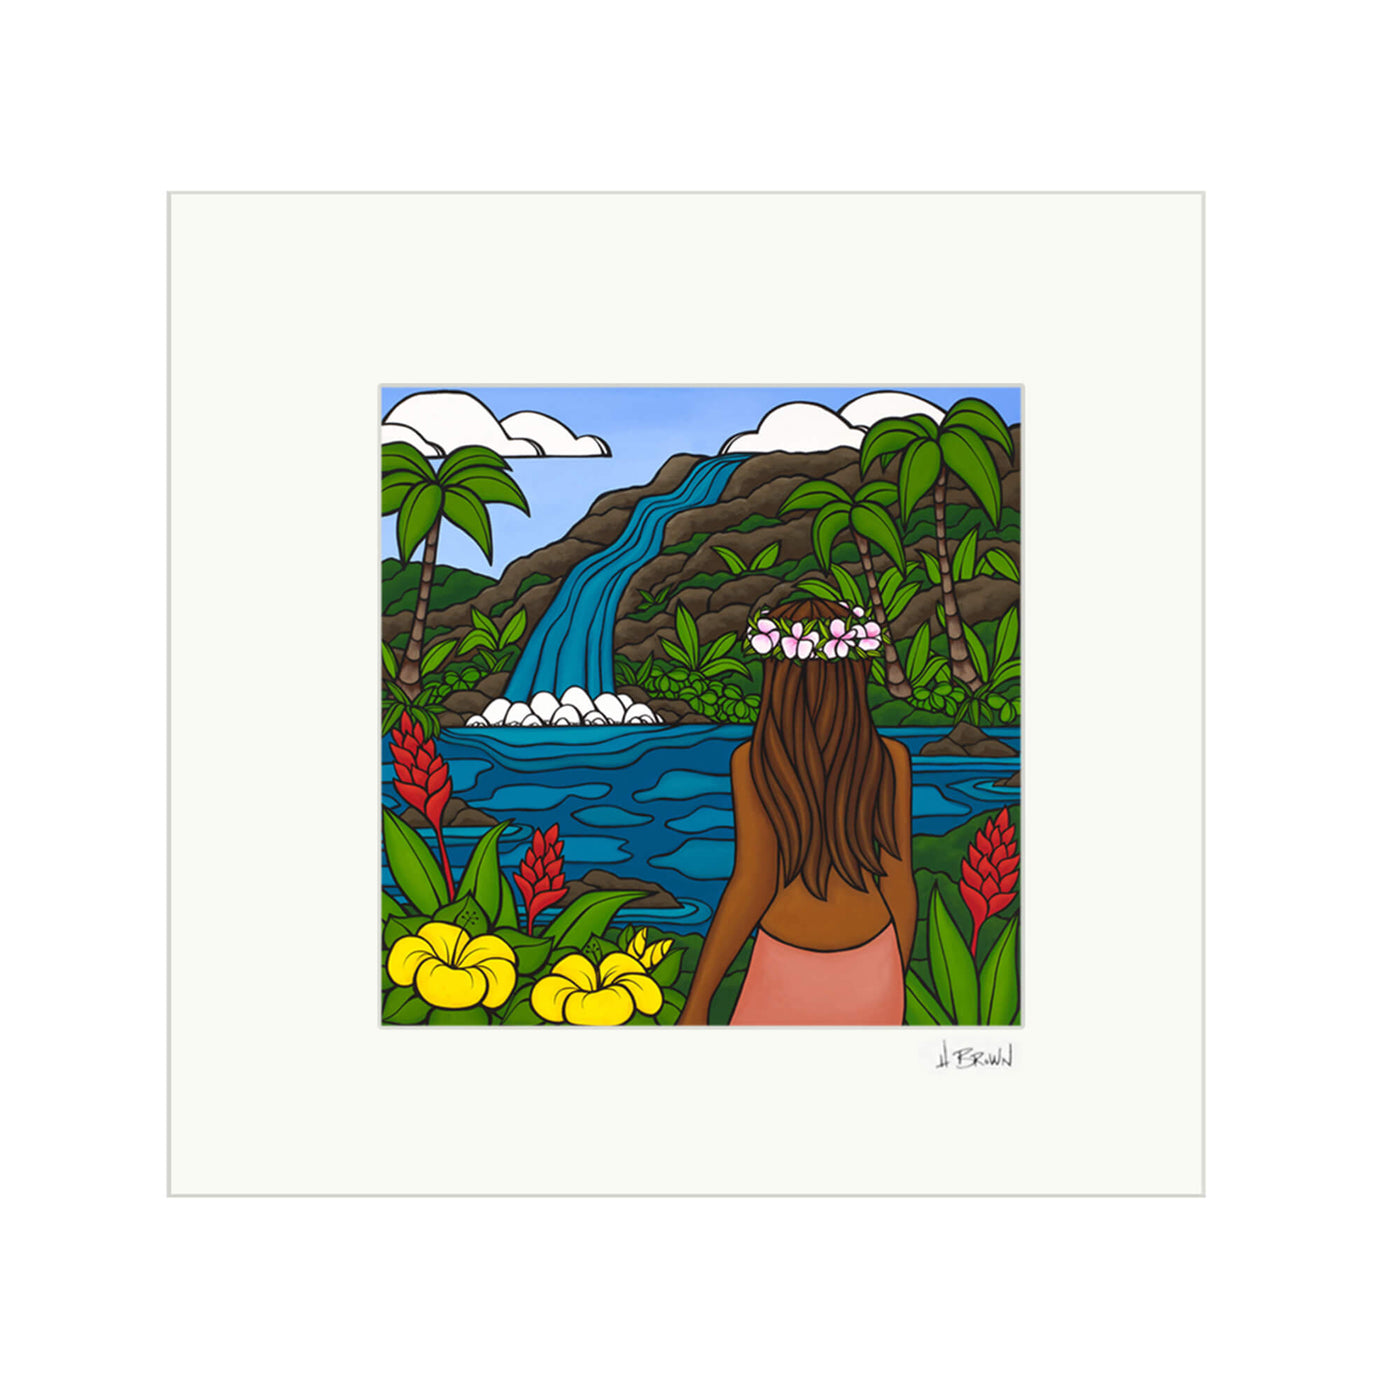 A matted art print of a local woman enjoying the waterfall view with colorful tropical flowers surrounding her by Hawaii surf artist Heather Brown